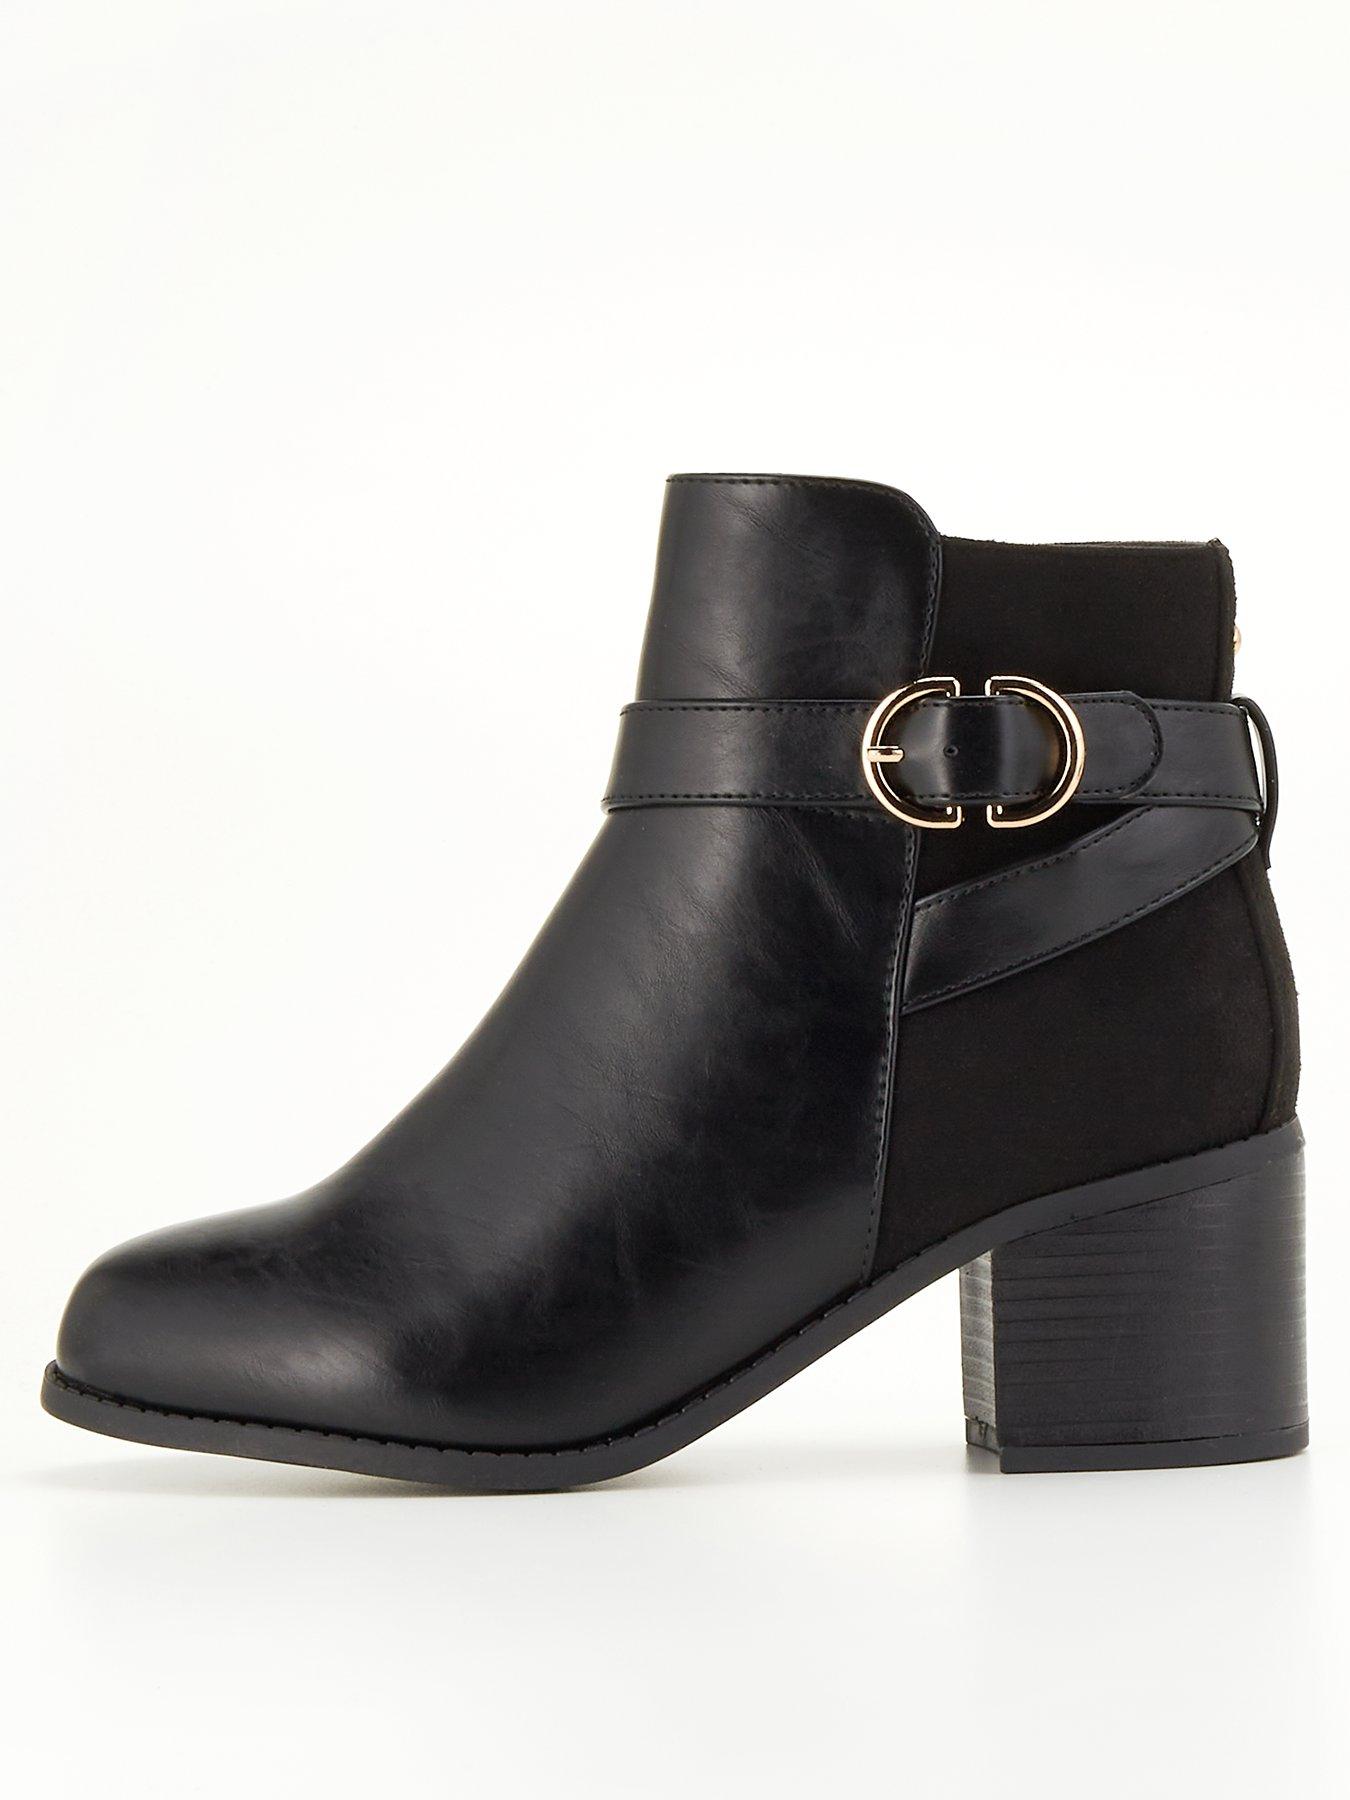 Black Buckle Lace Up Ankle Boots In Wide E Fit & Extra Wide EEE Fit